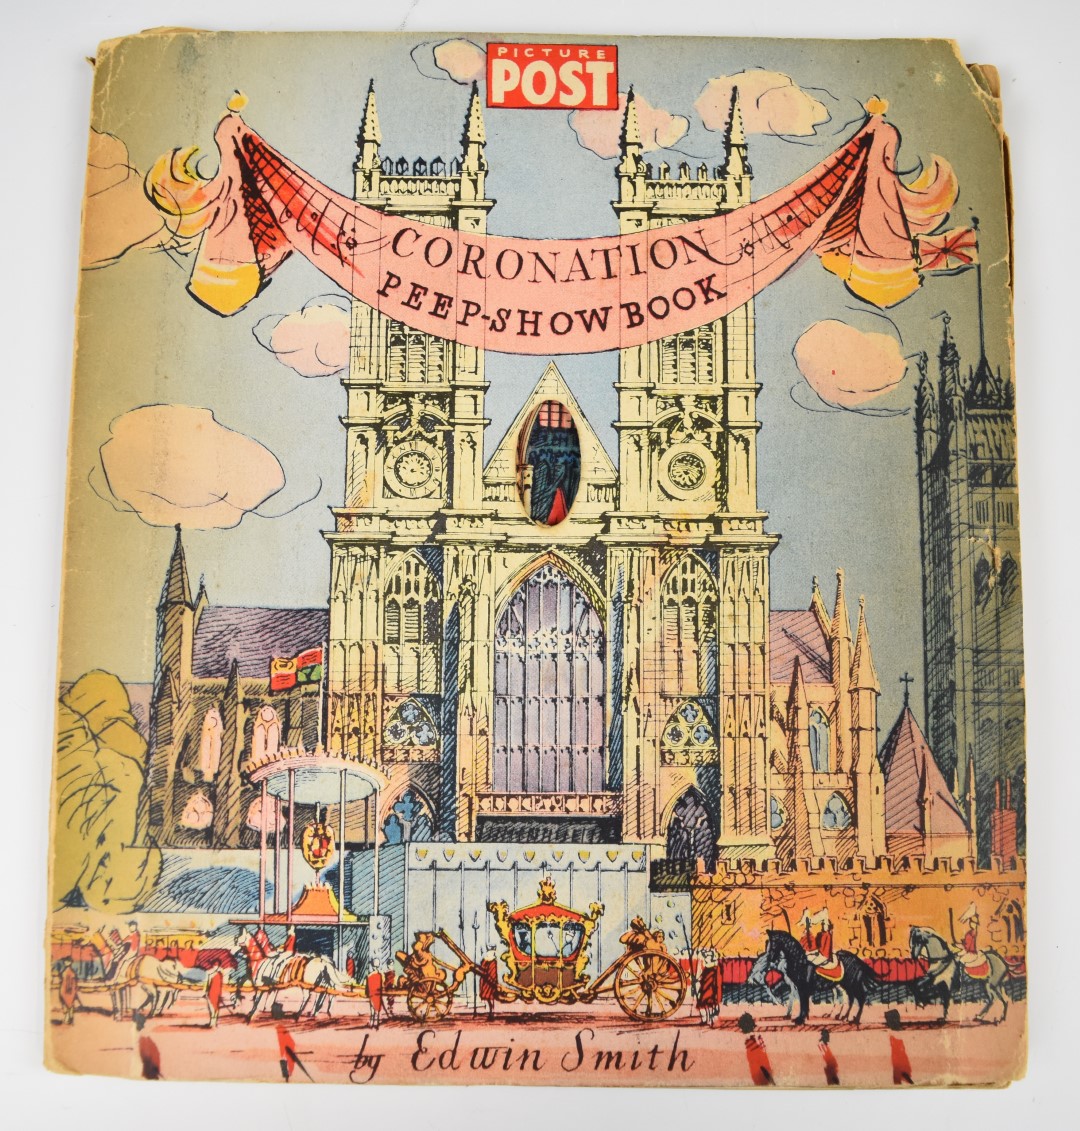 [Peep-Show] The Picture Post Coronation Peep-Show Book, Devised & Drawn by Edwin Smith with a